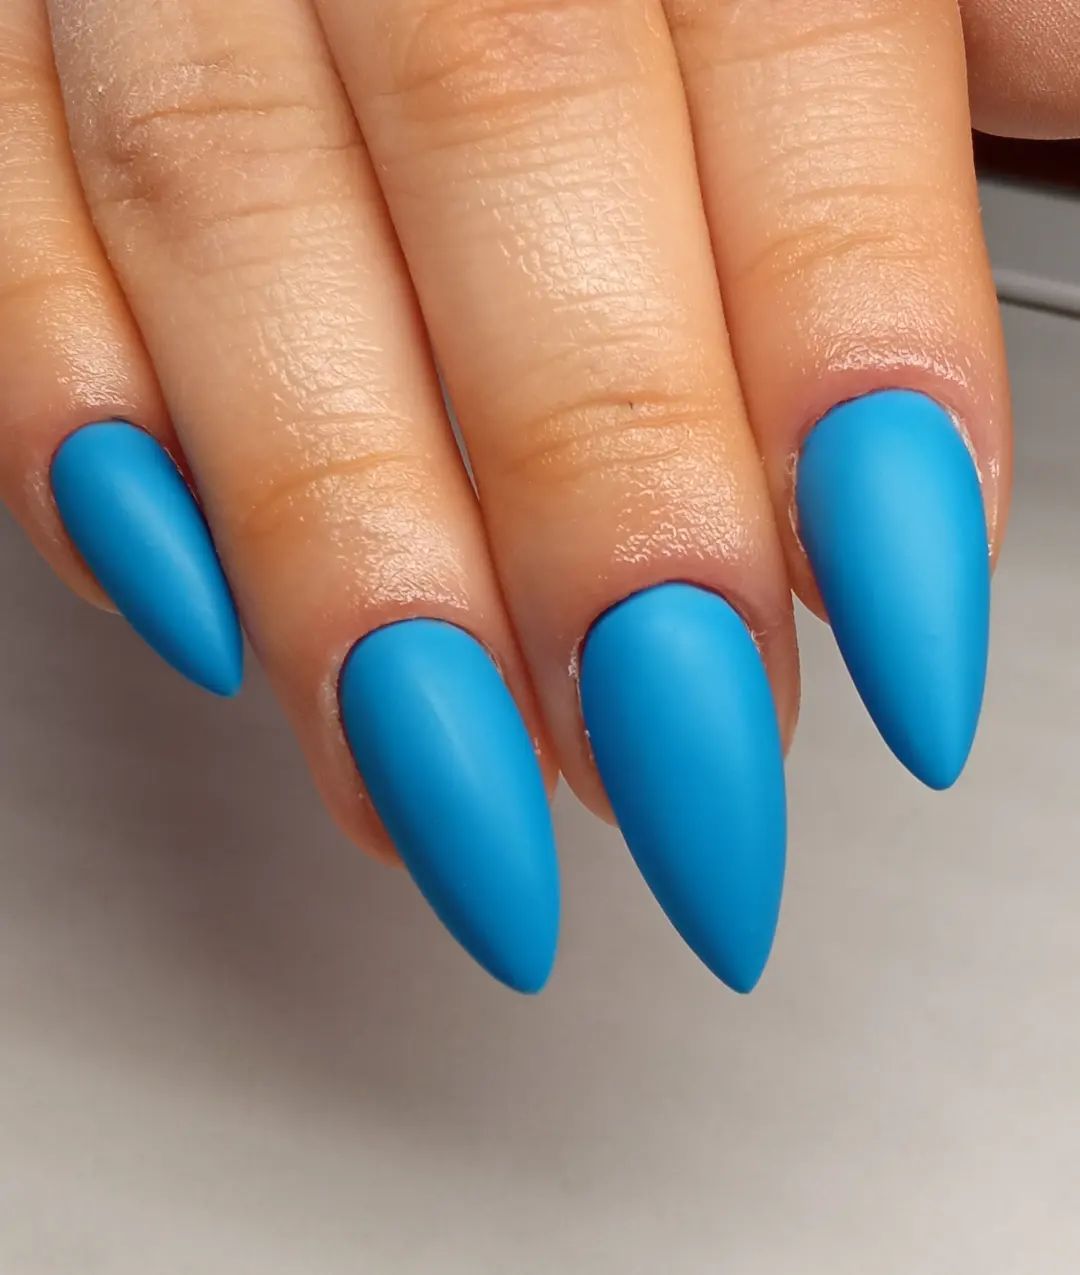 Feel the freedom with blue nails. The nails above are long and they are painted in such a great blue shade. It is also a good idea to decorate it with silver or gold gems or glitters.